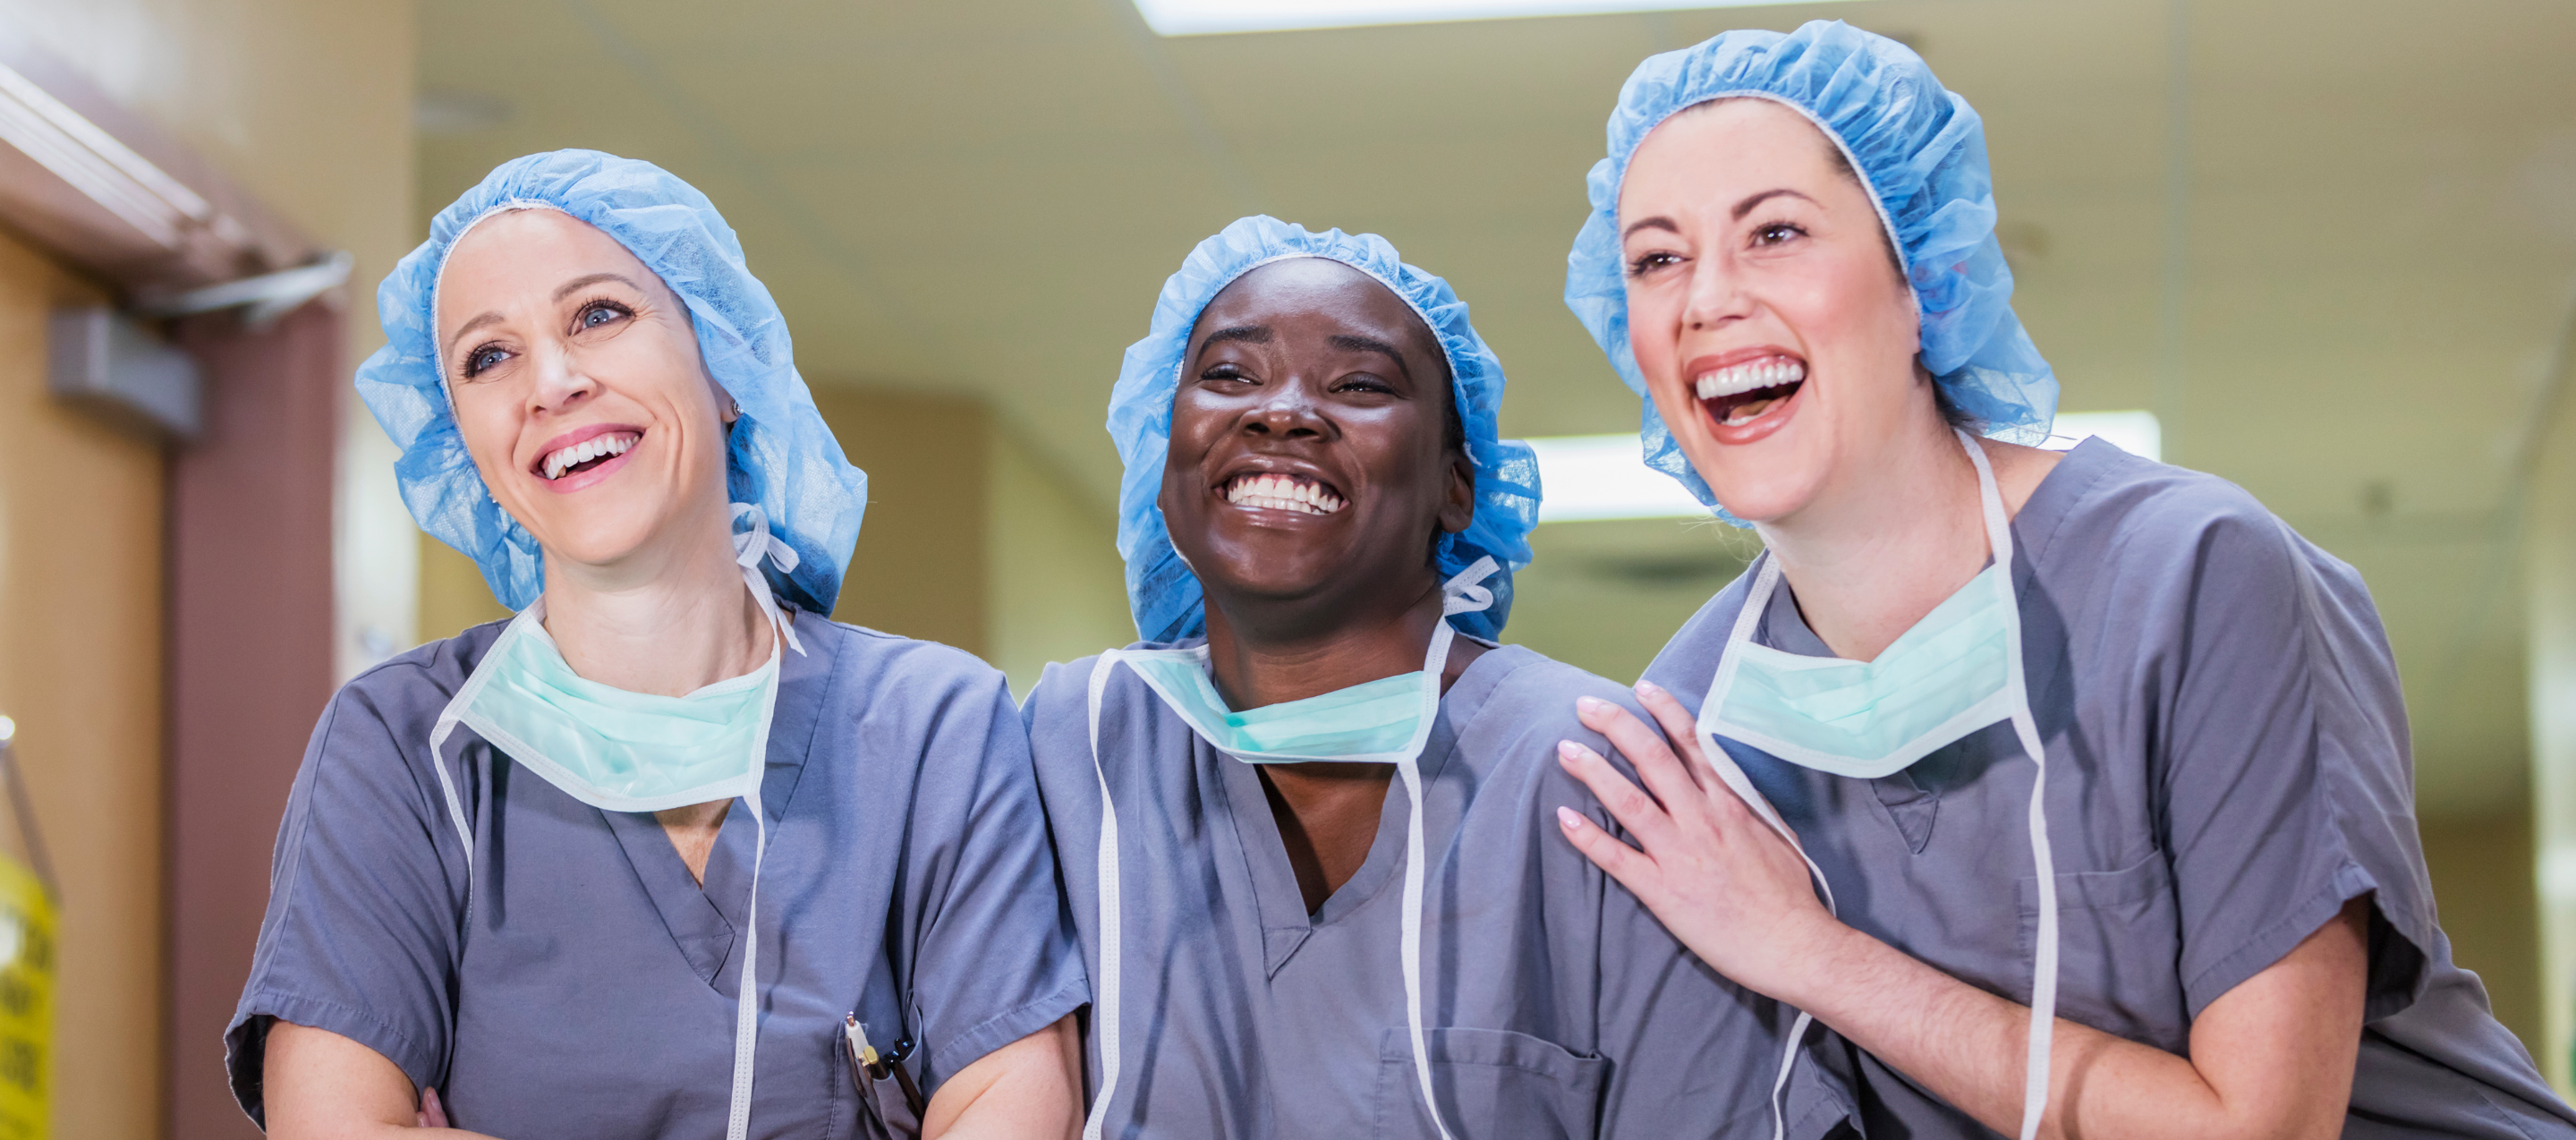 Three female hospital clinicians laughing together